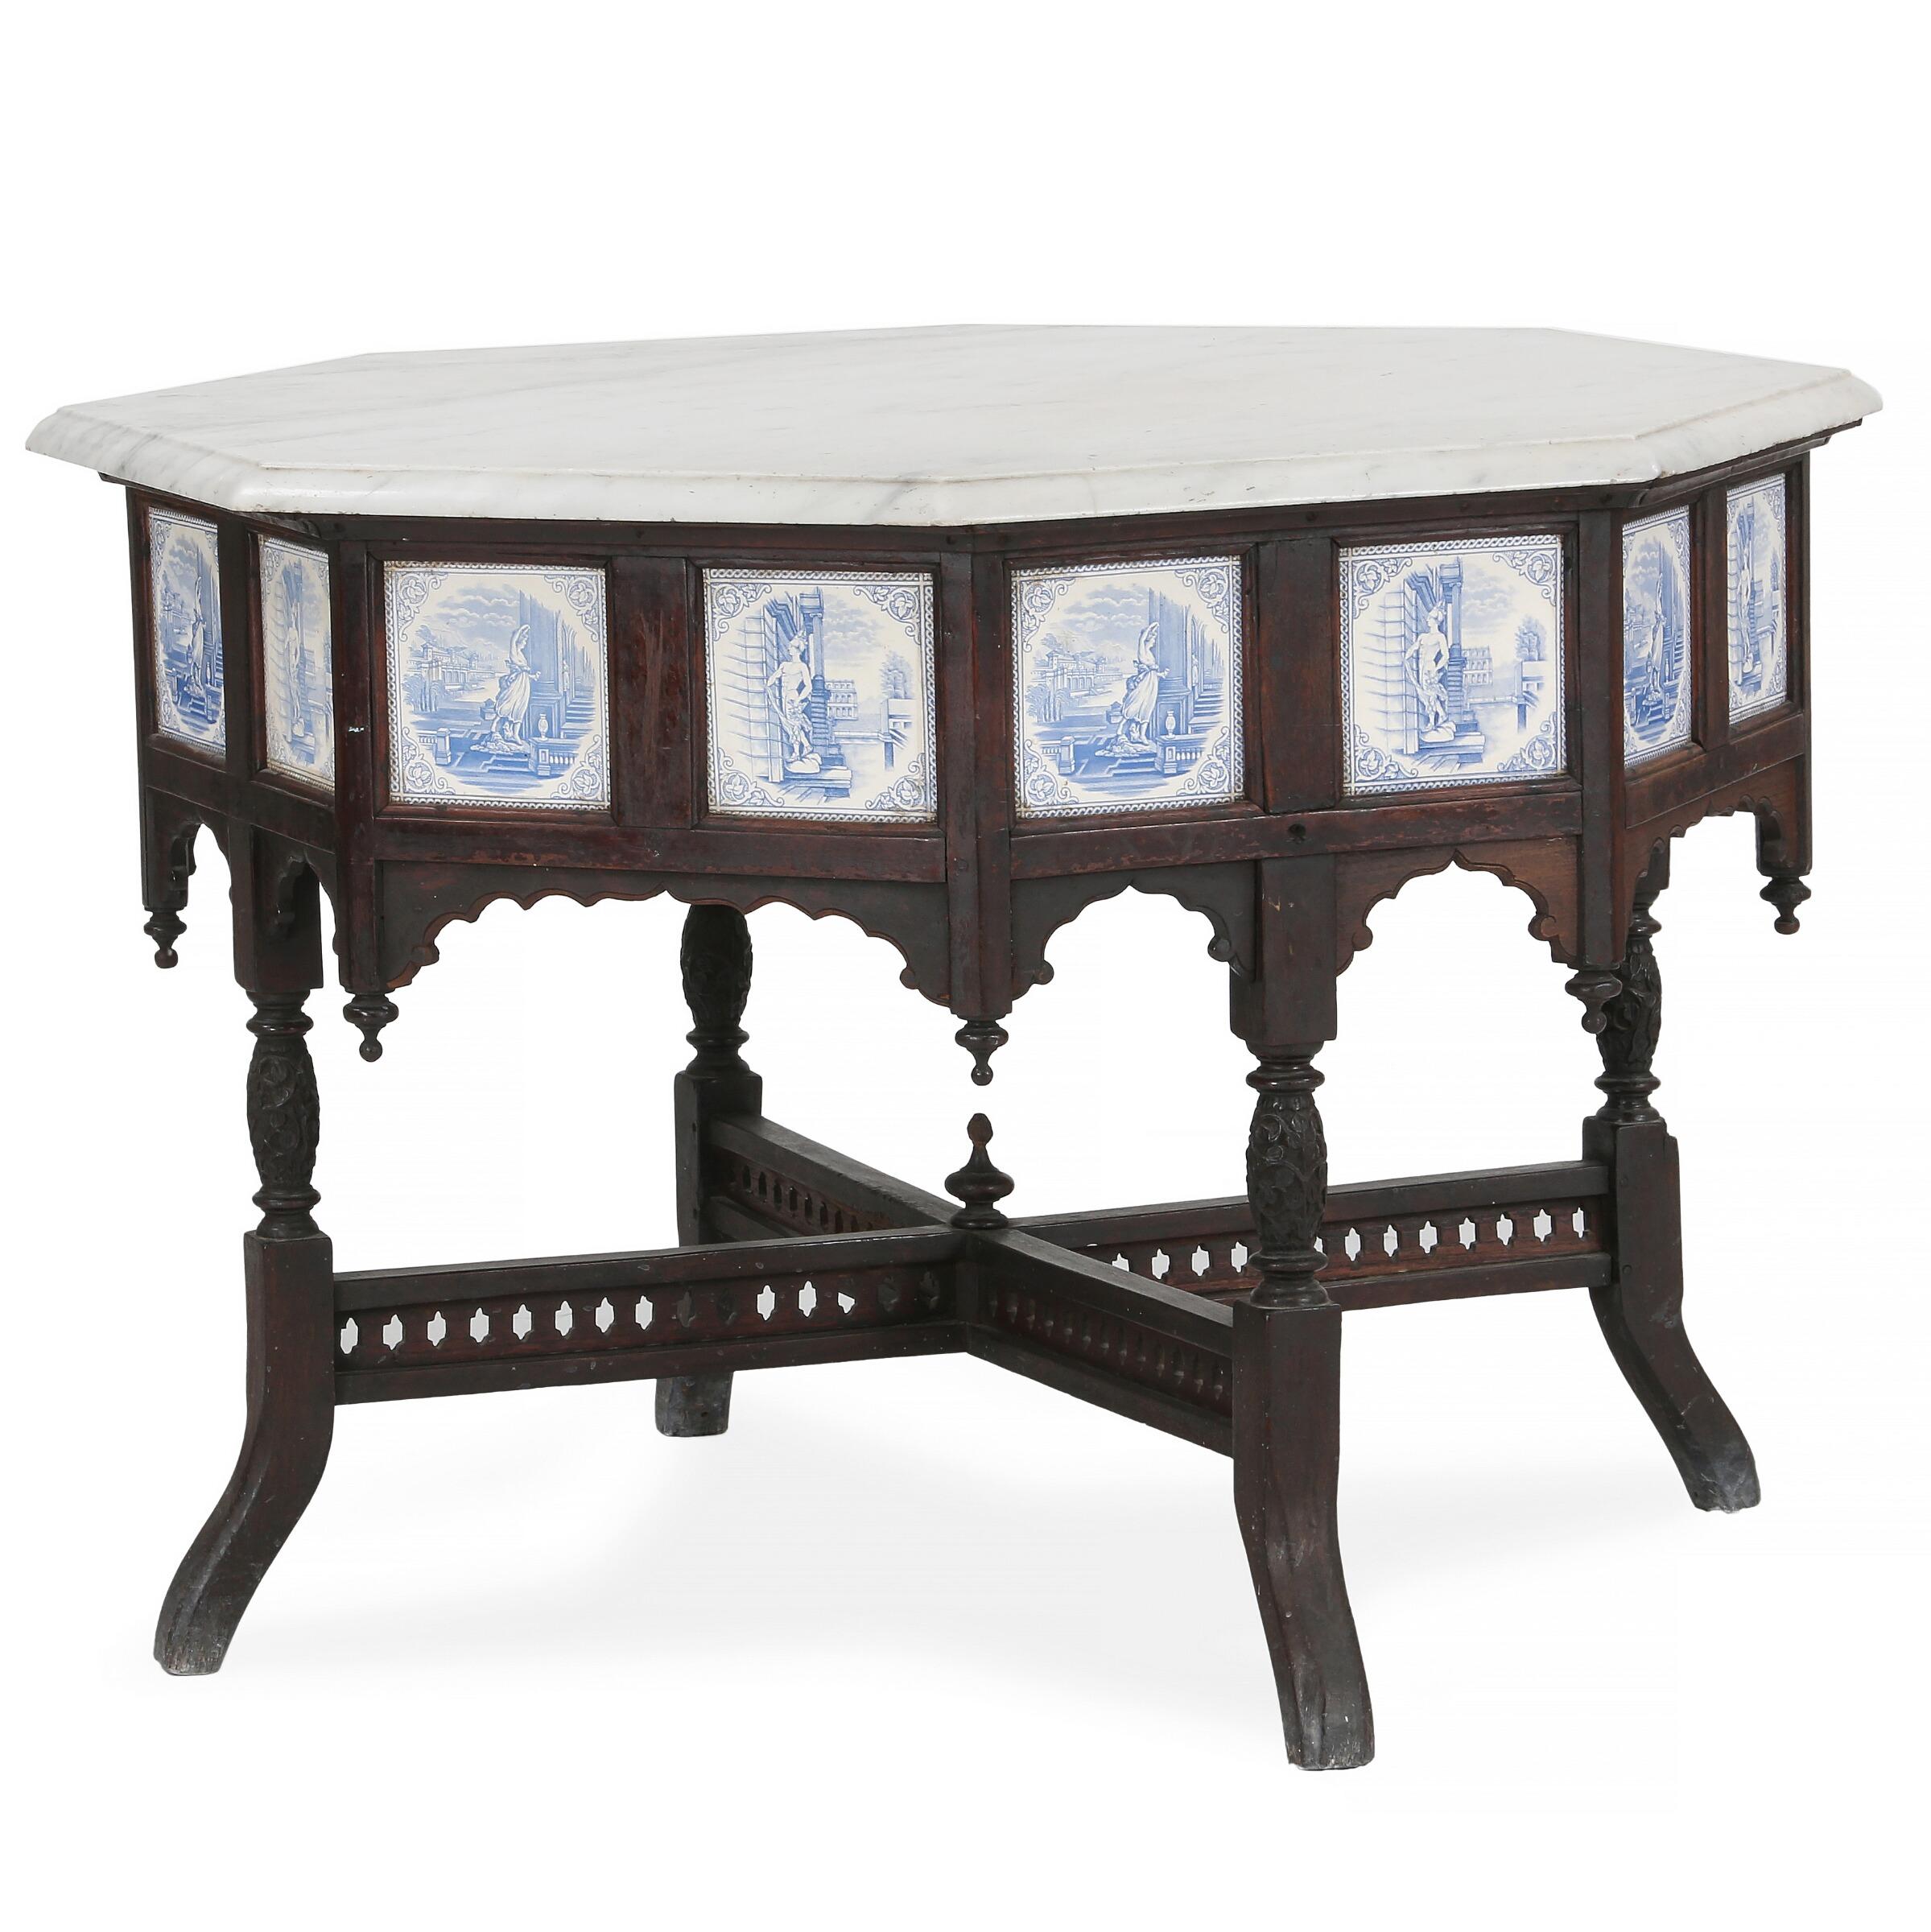 Marvelous Anglo-Indian octagonal center table in carved hardwood set with multiple faience tiles in blue and white neoclassical designs and having an off-white, grey-grained marble top.